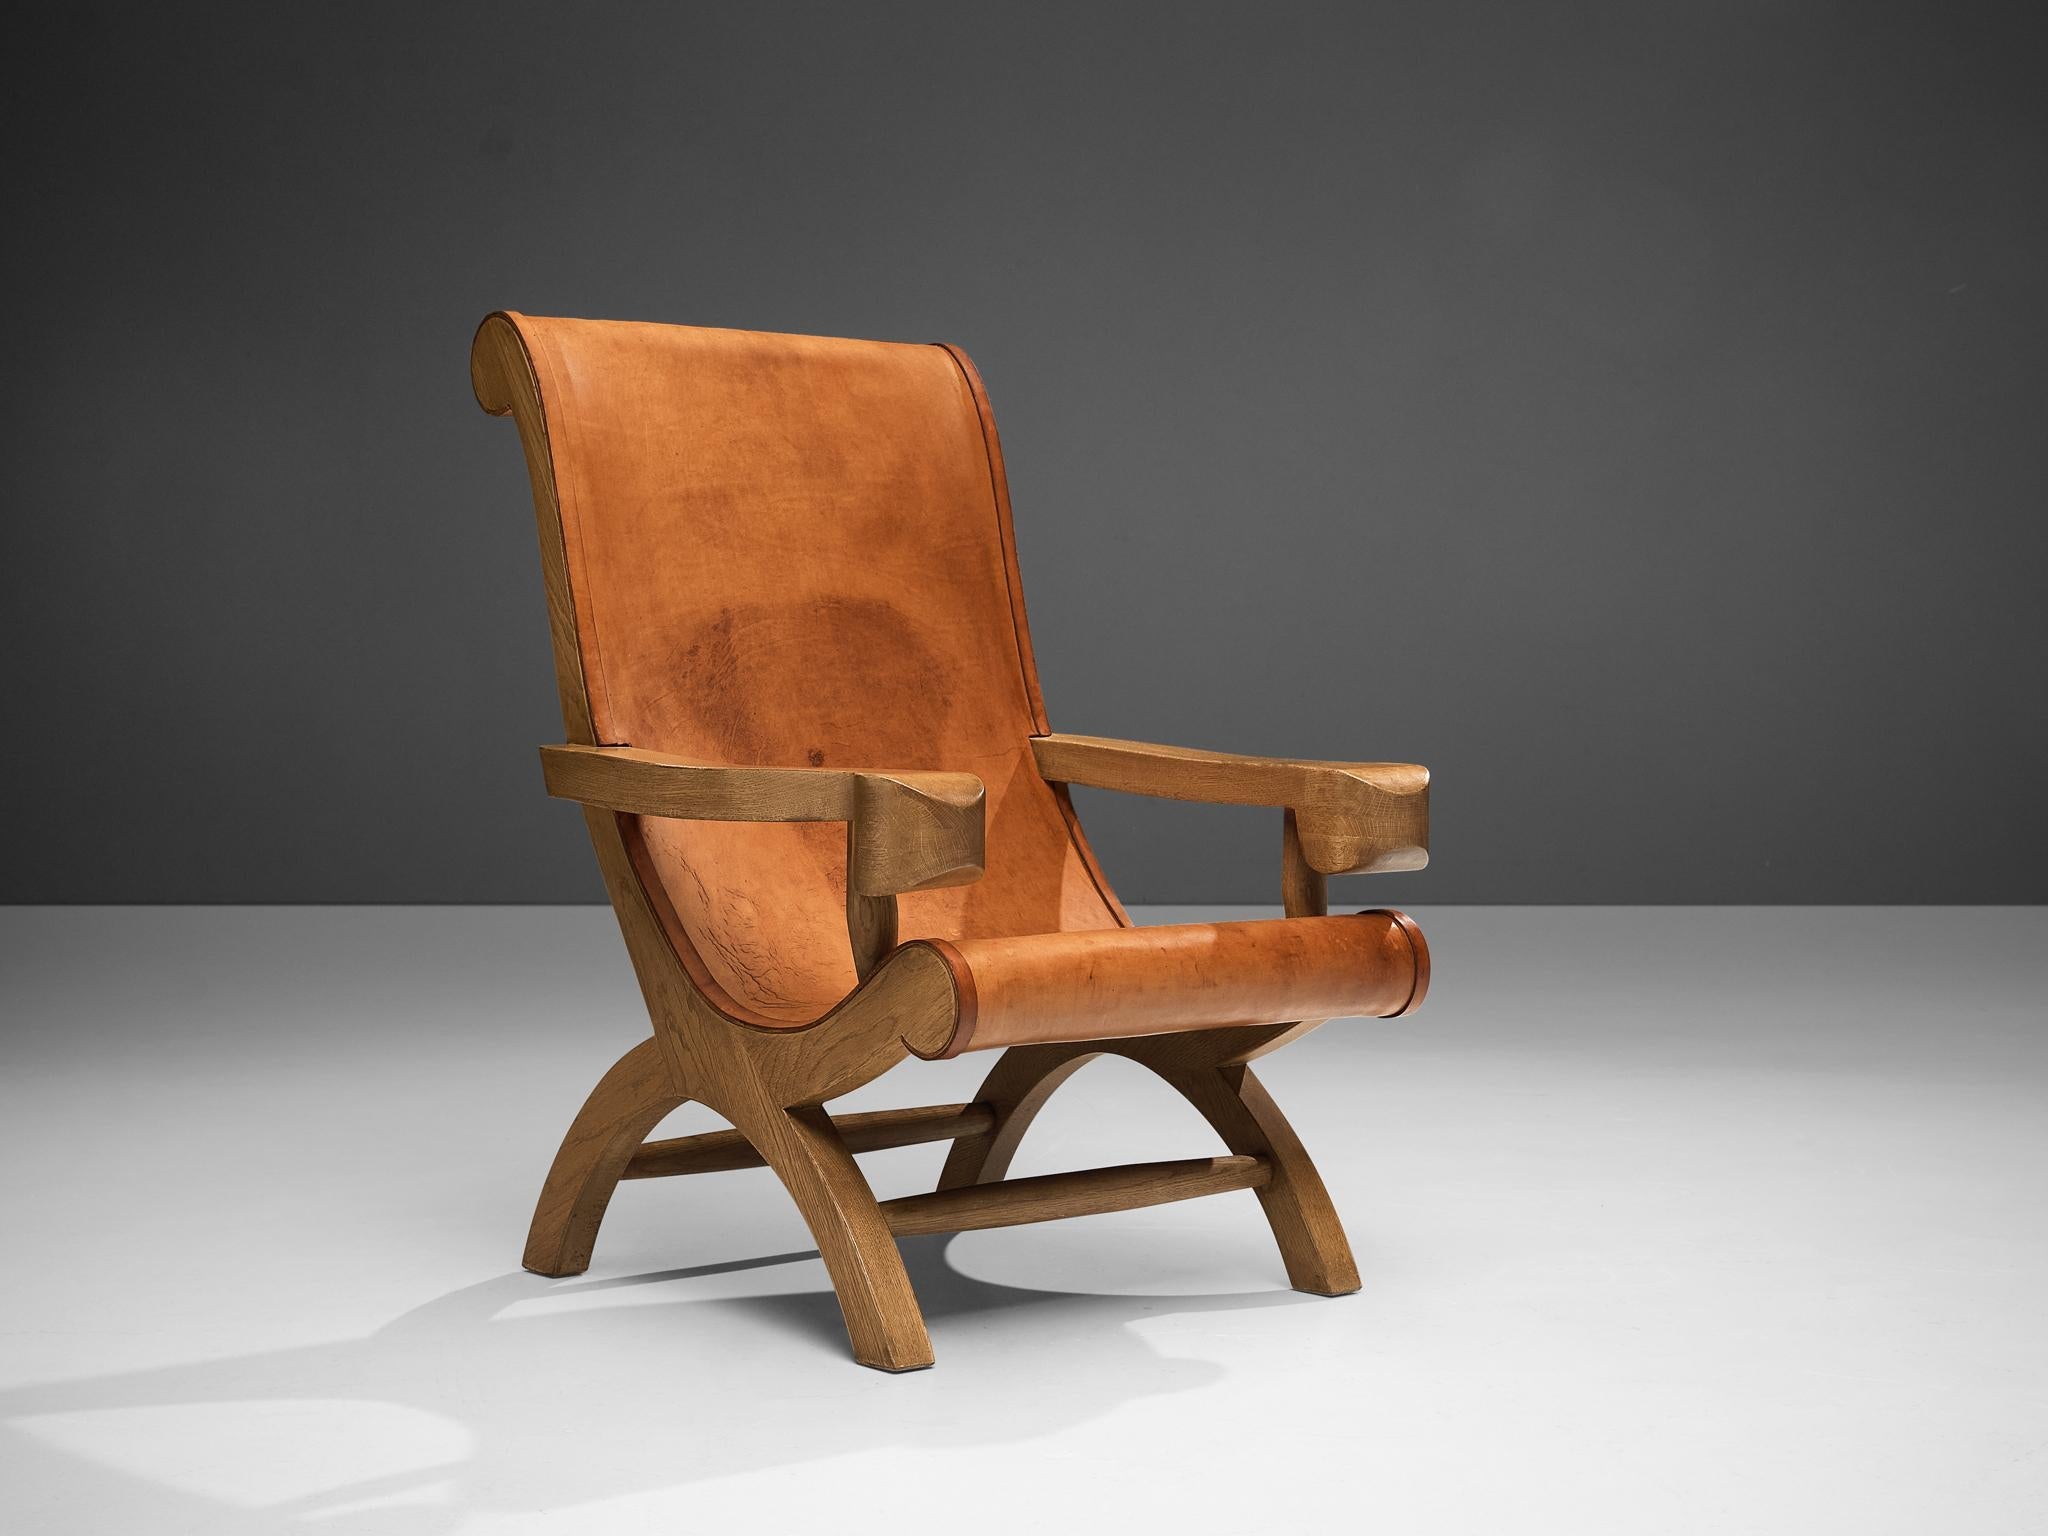 Clara Porset Lounge Chairs 'Butaque' in Original Patinated Leather